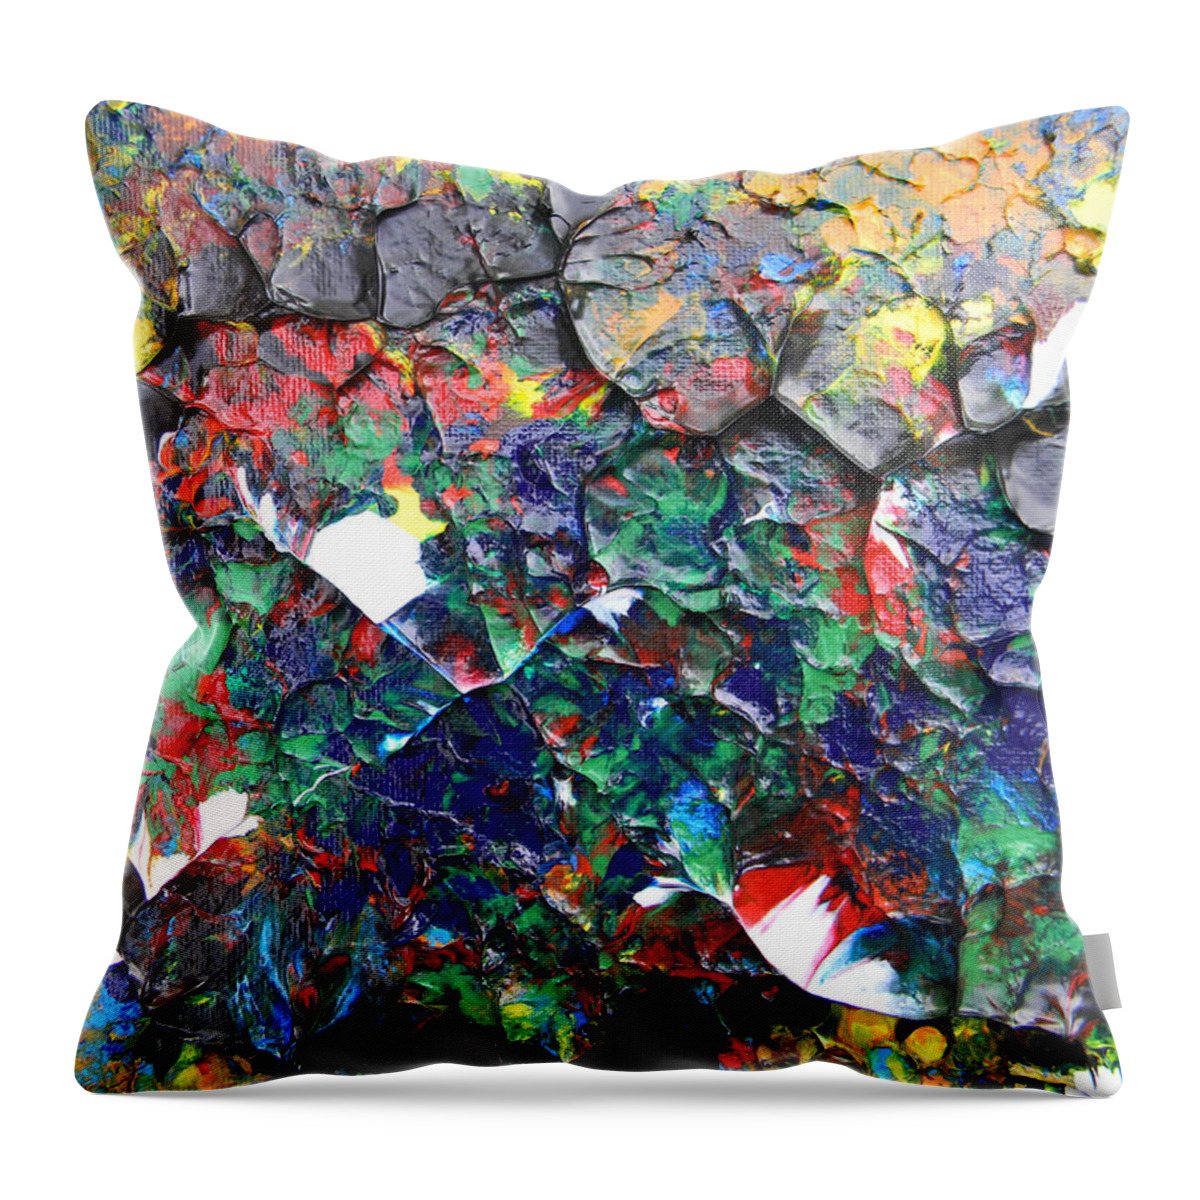 Abstract Art Throw Pillow featuring the painting X O 1 by Marwan George Khoury